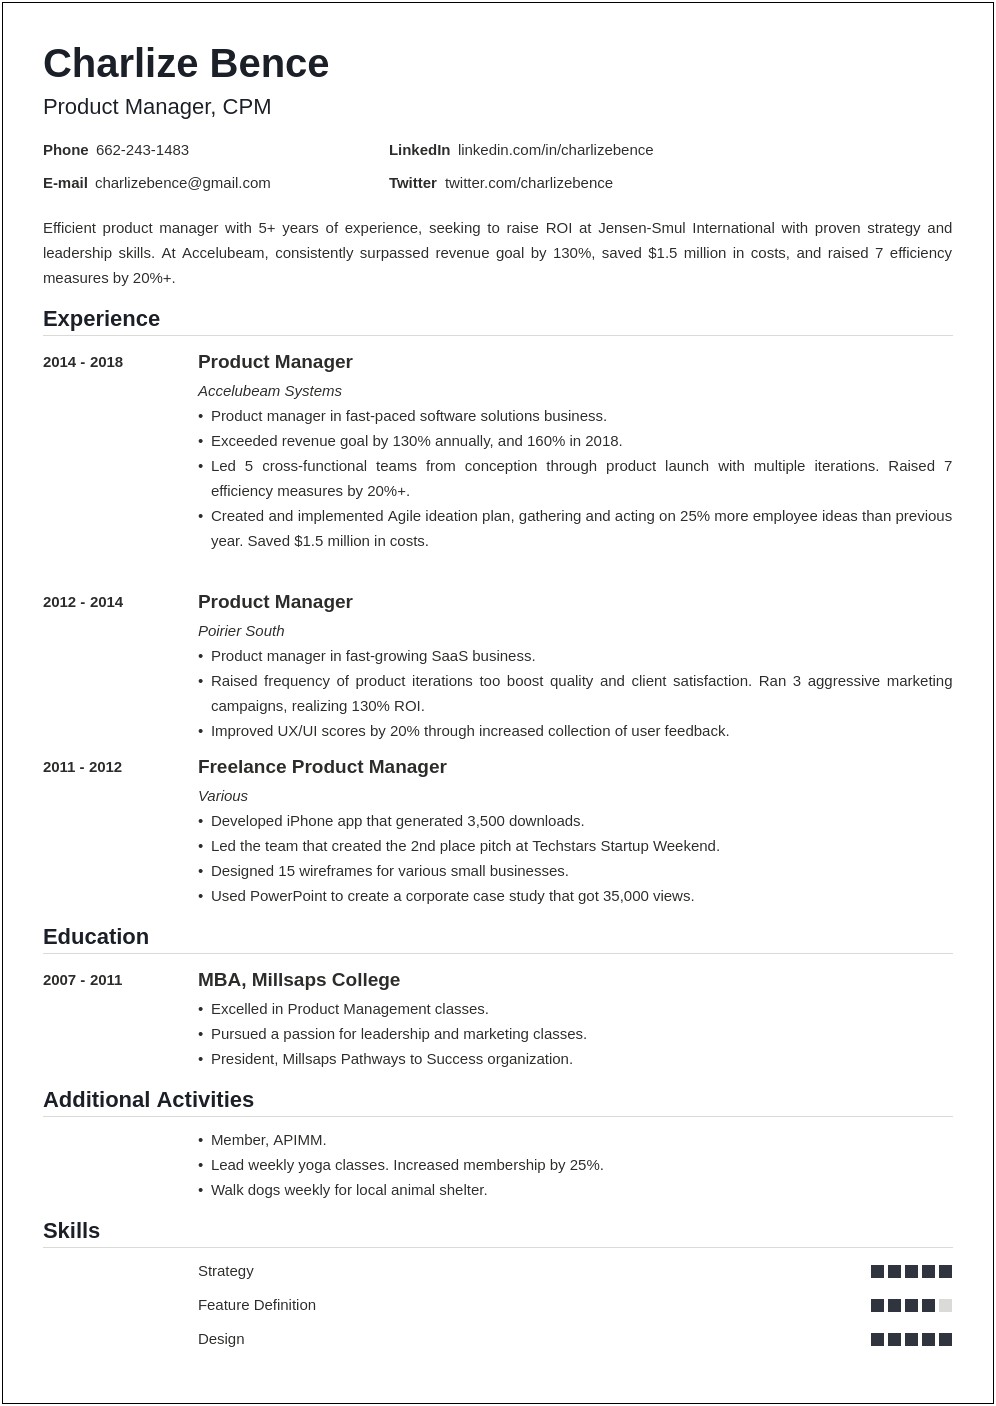 Resume Objective For Product Owner